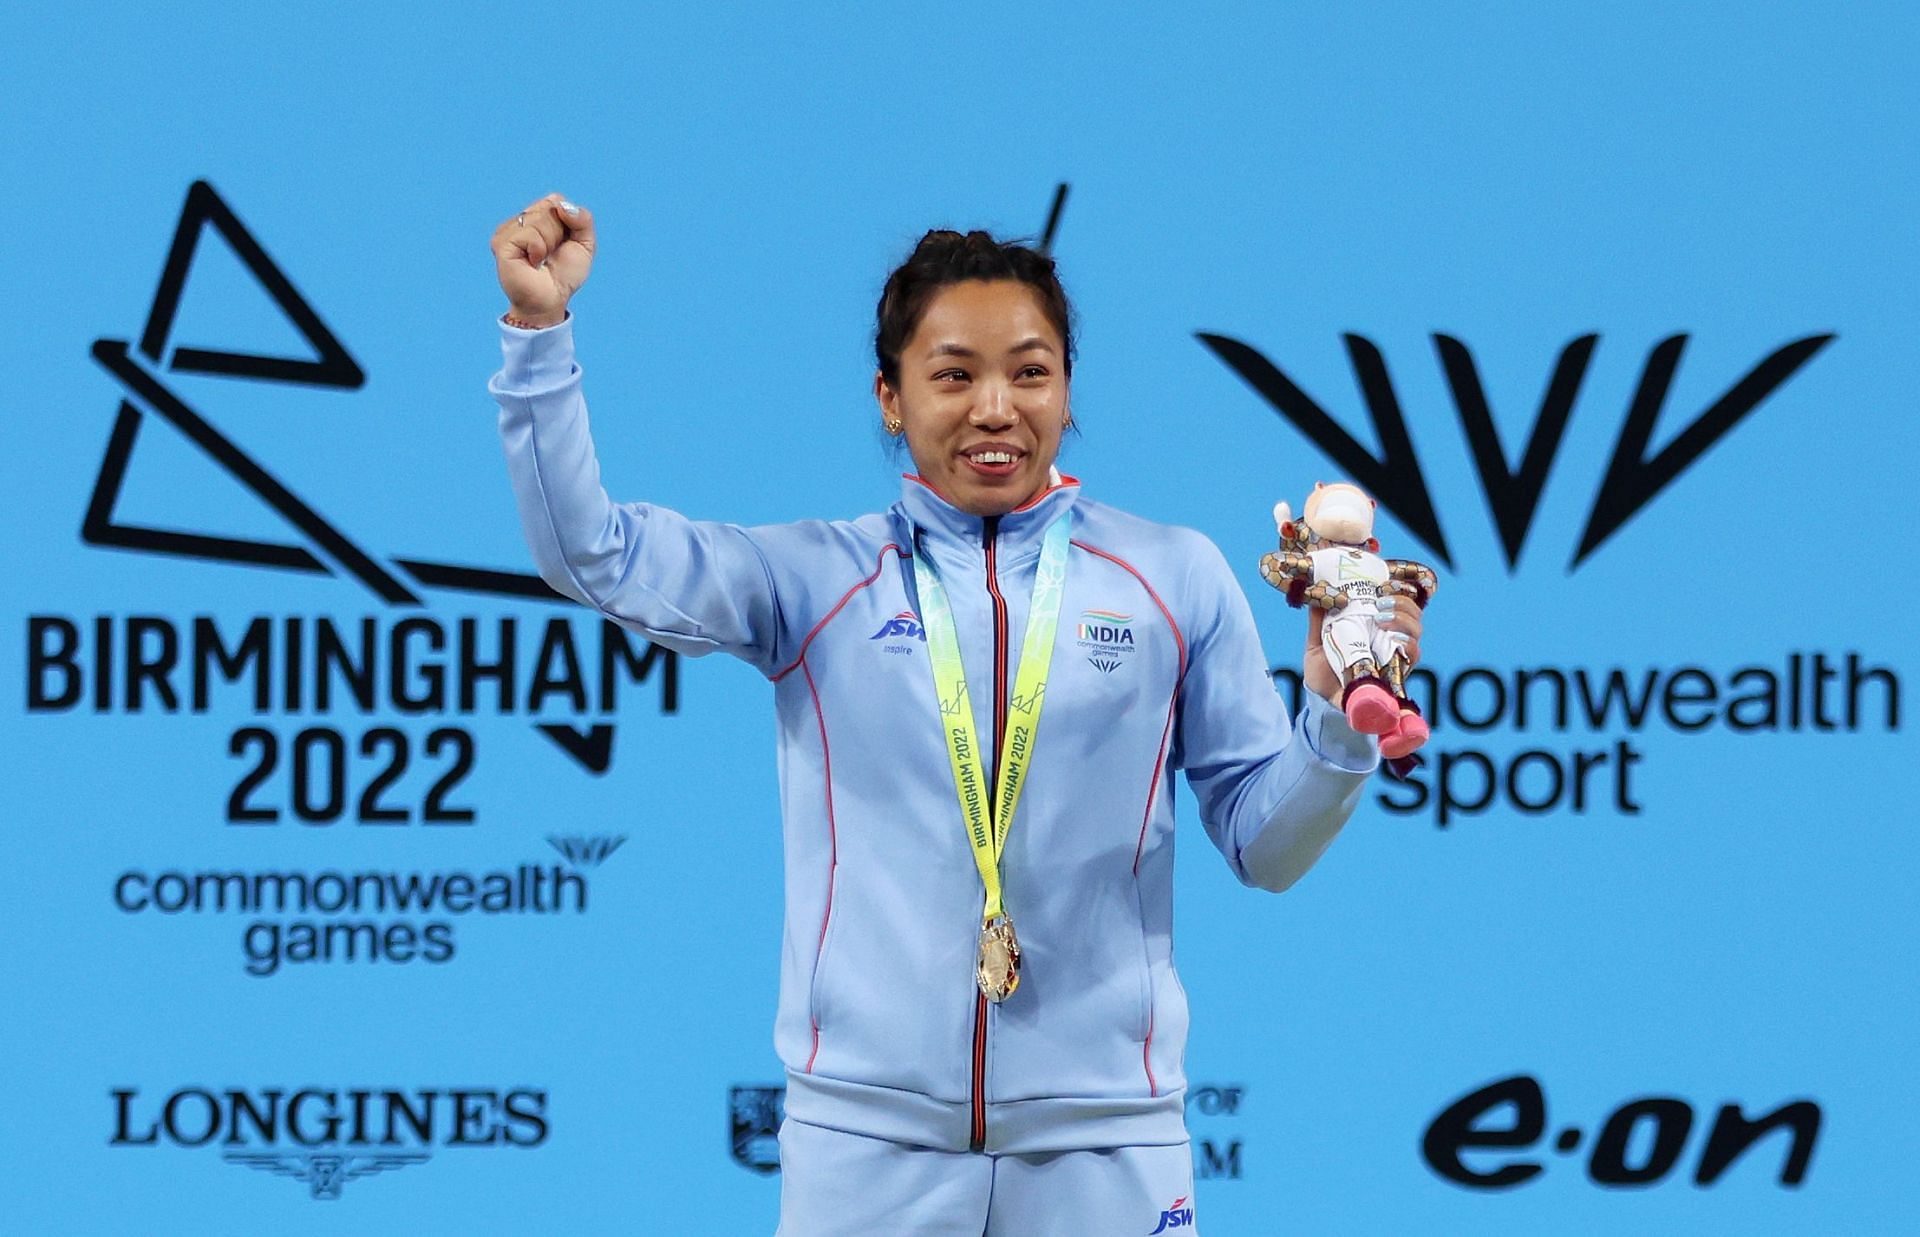 Watch Moment when Mirabai Chanu won Indias first gold medal at CWG 2022; breaks Commonwealth Games record